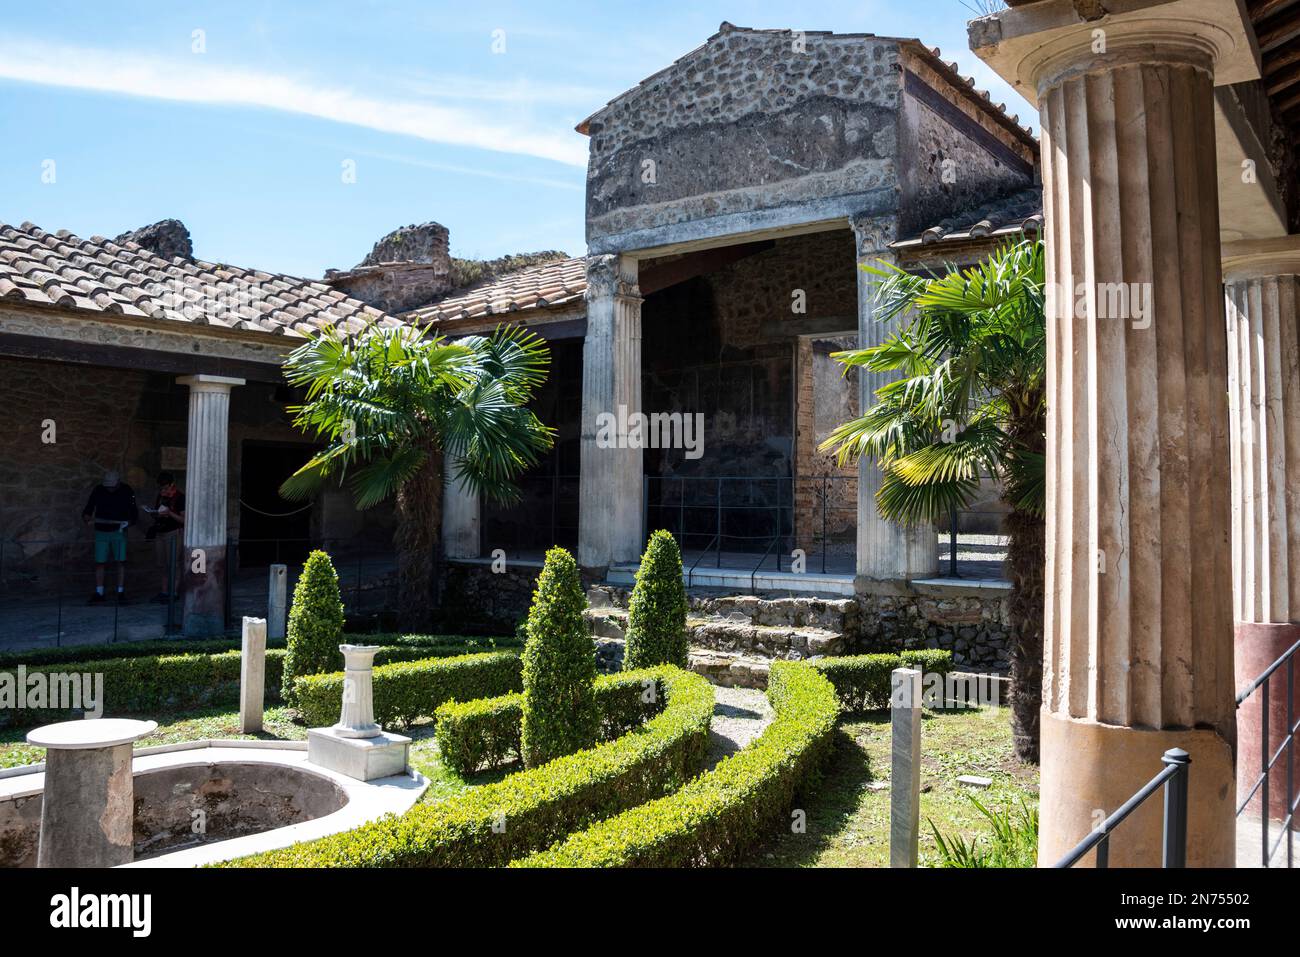 Pompeii, Italy, Yard in a typical Roman villa of the ancient Pompeii, Southern Italy Stock Photo